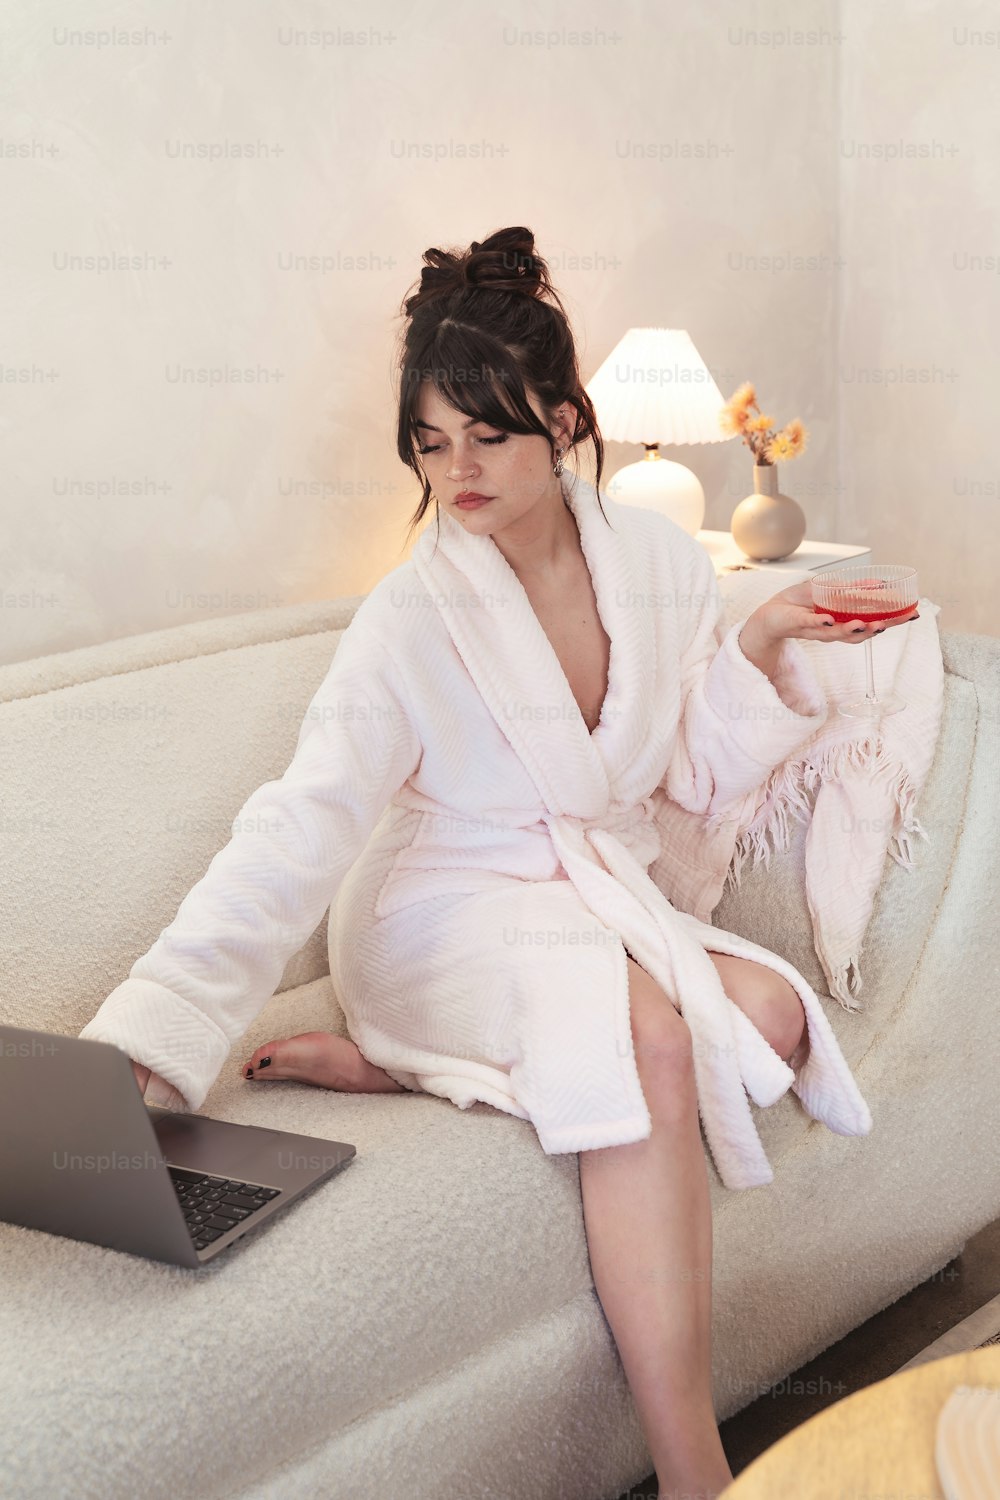 a woman in a bathrobe sitting on a couch with a laptop